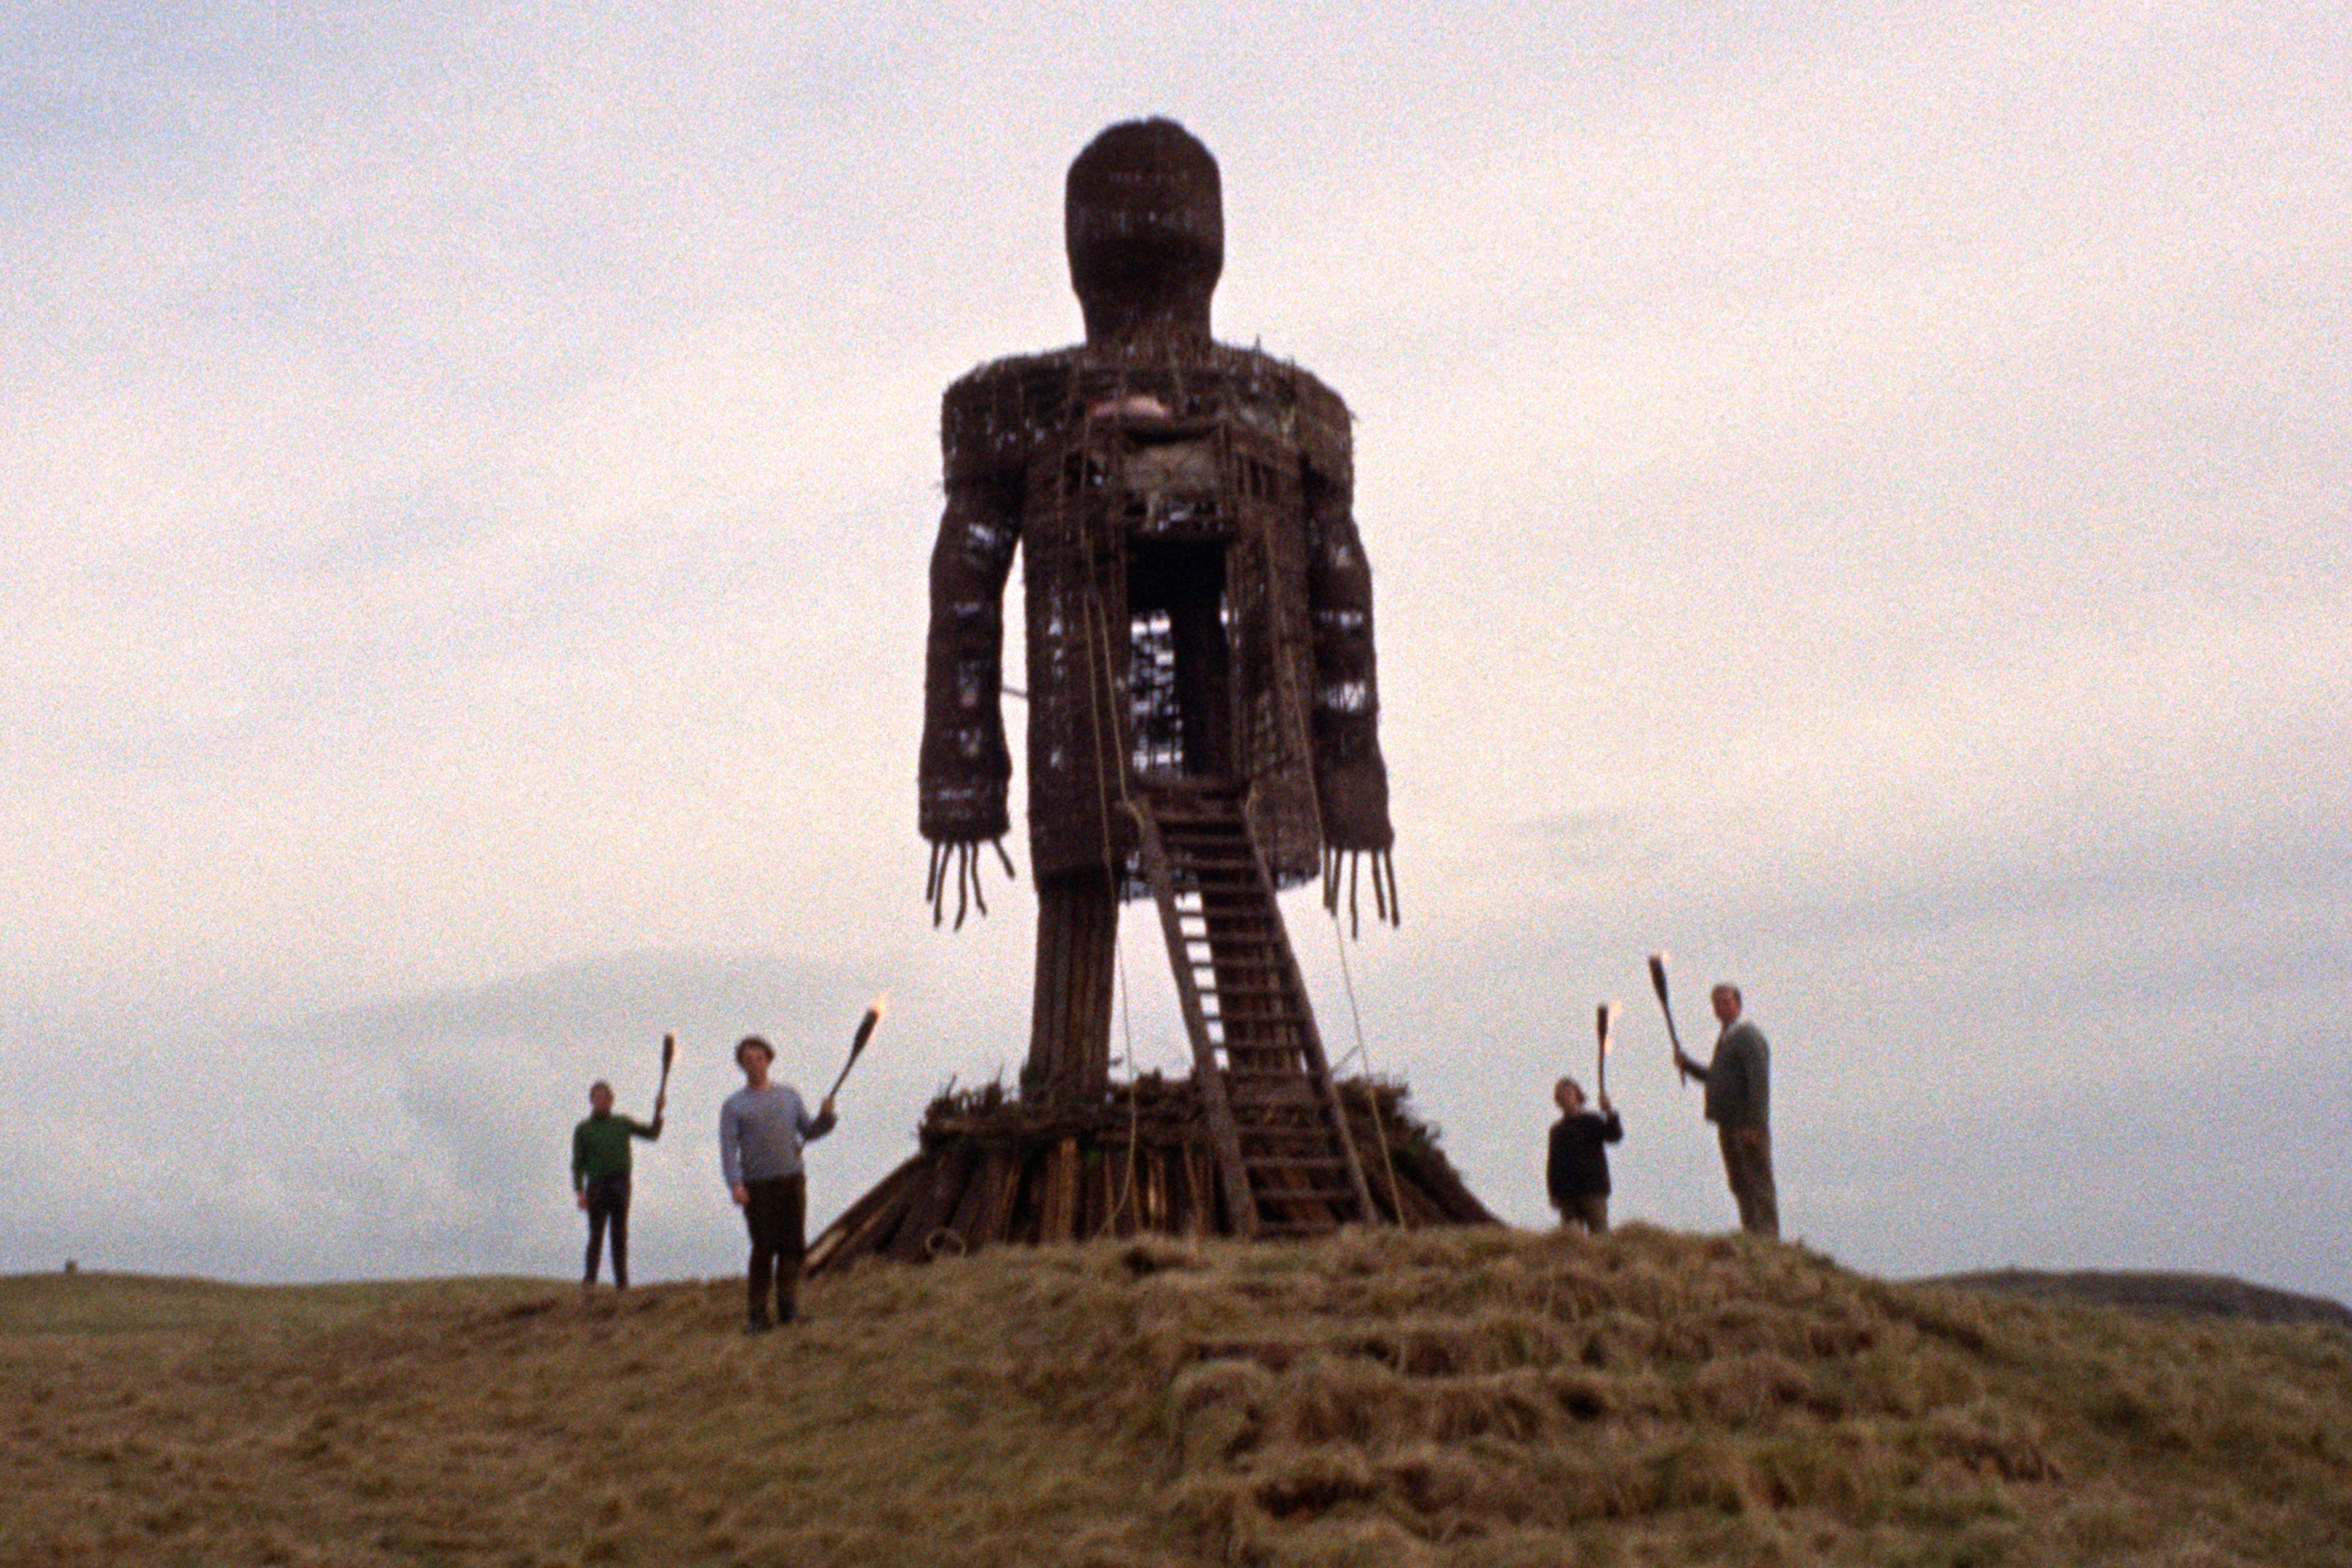 On 21 June – the date of this year’s summer solstice – a 4K restoration of ‘The Wicker Man: The Final Cut’ will be released in cinemas nationally, for one night only